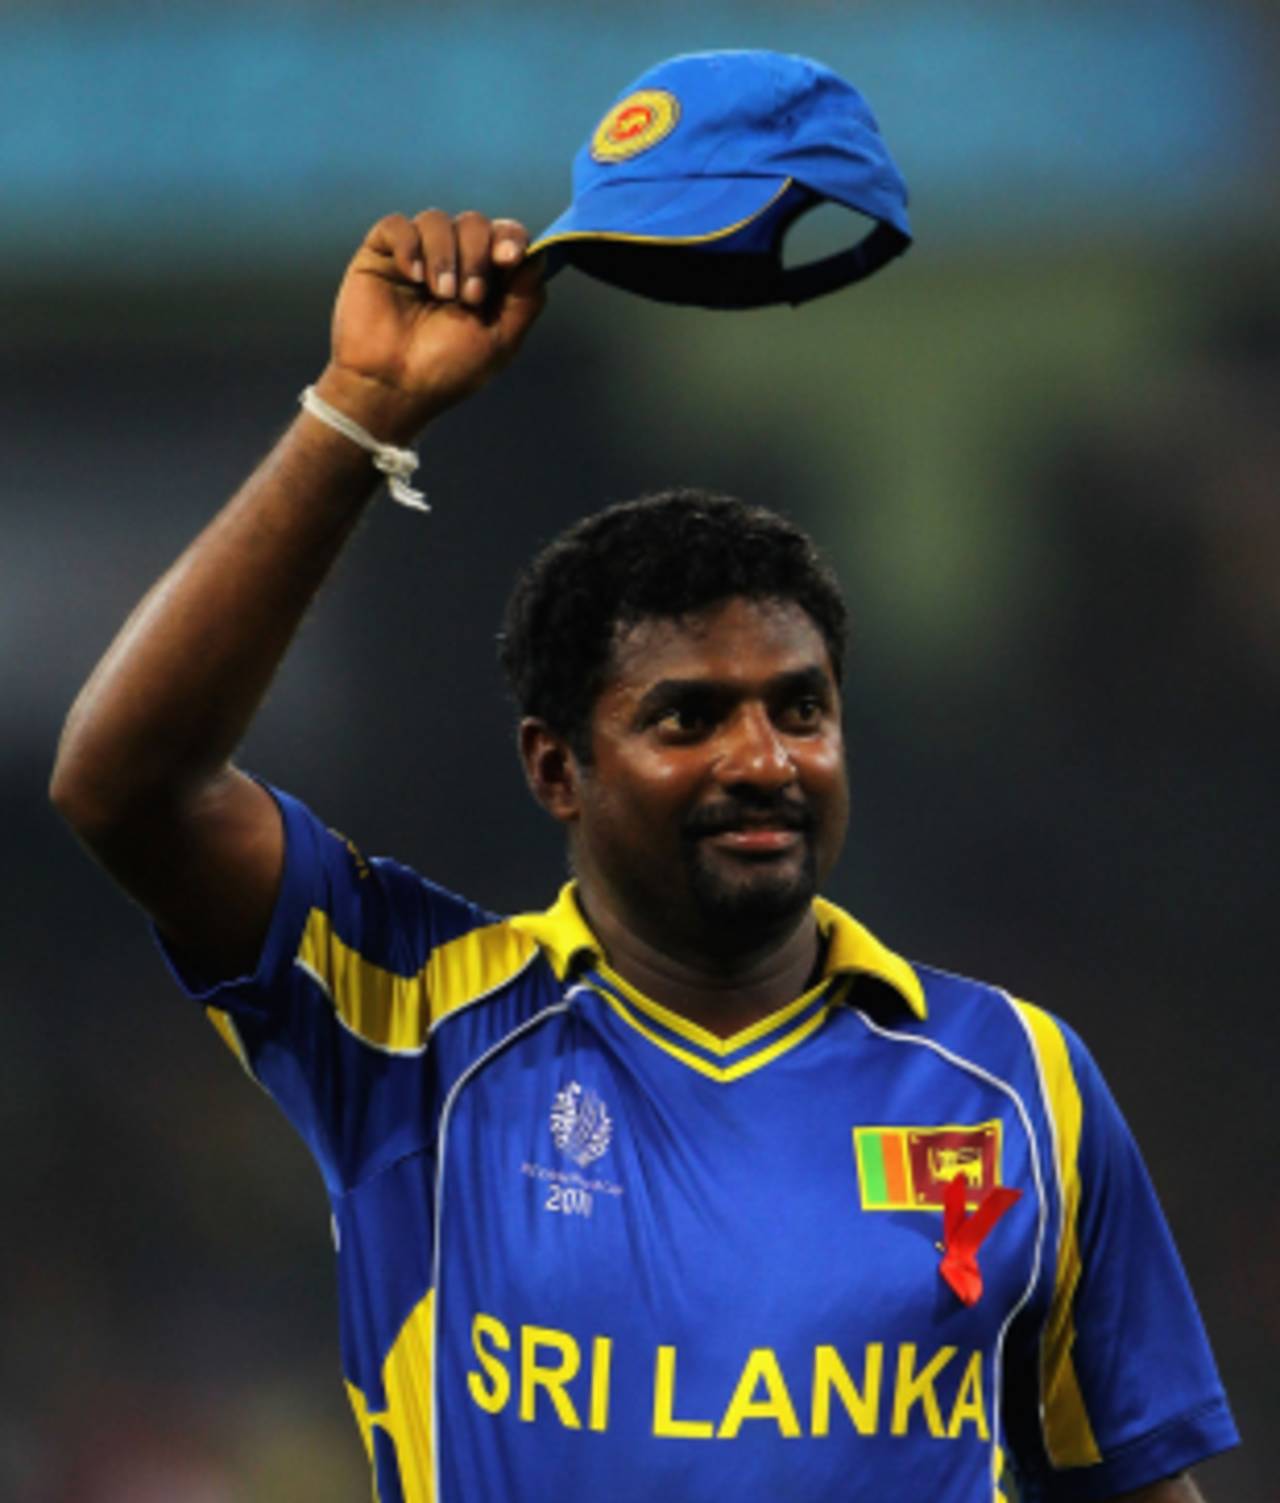 Muttiah Muralitharan salutes the crowd after completing his final spell in Sri Lanka, Sri Lanka v New Zealand, 1st semi-final, World Cup 2011, Colombo, March 29, 2011